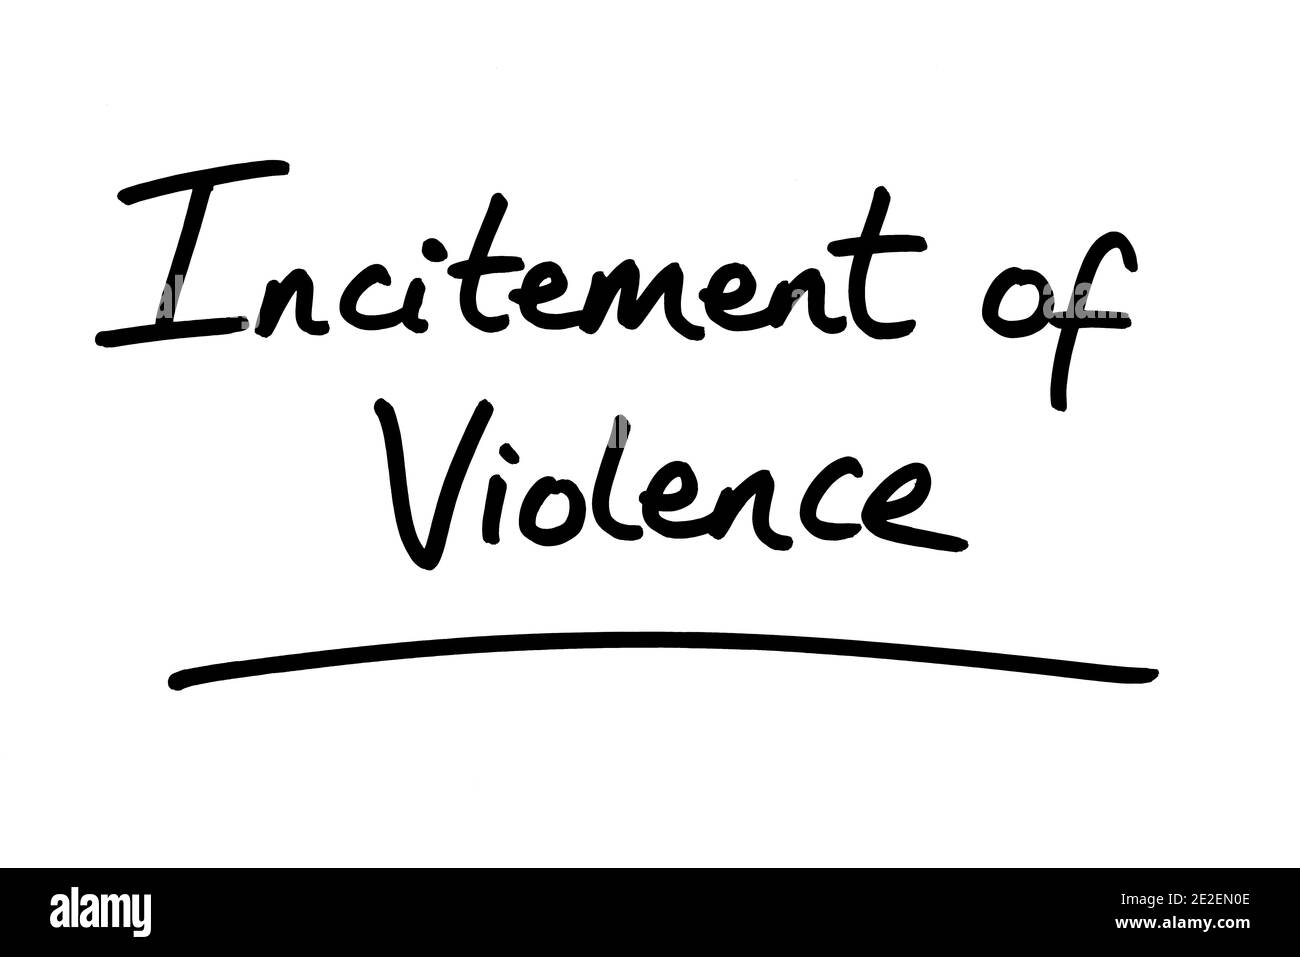 Incitement of the Violence, handwritten on a white background. Stock Photo